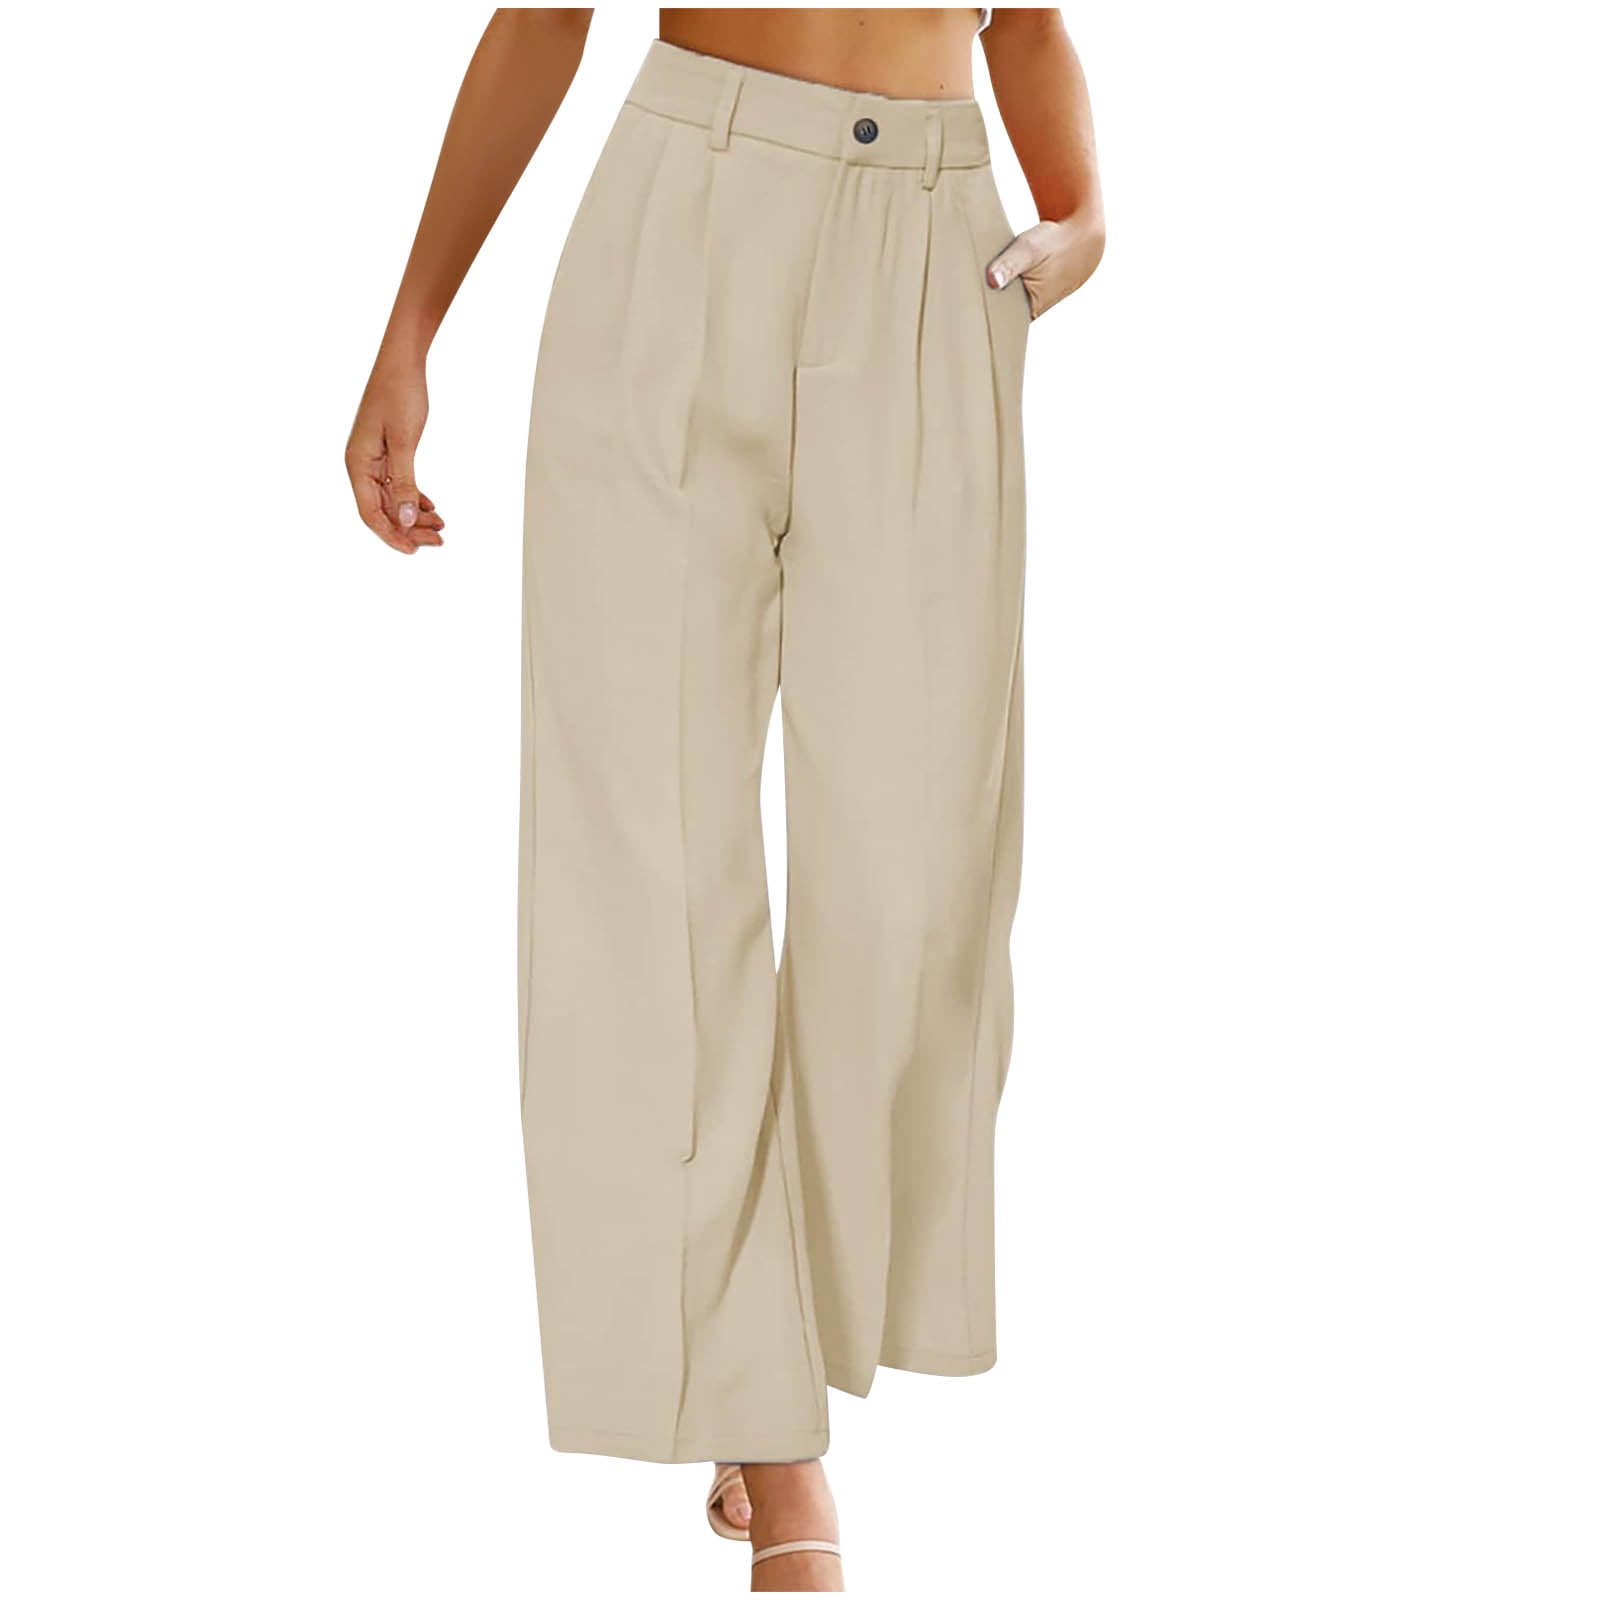 Womens Wide Leg Pleated Pants Dressy Casual High Waisted Loose